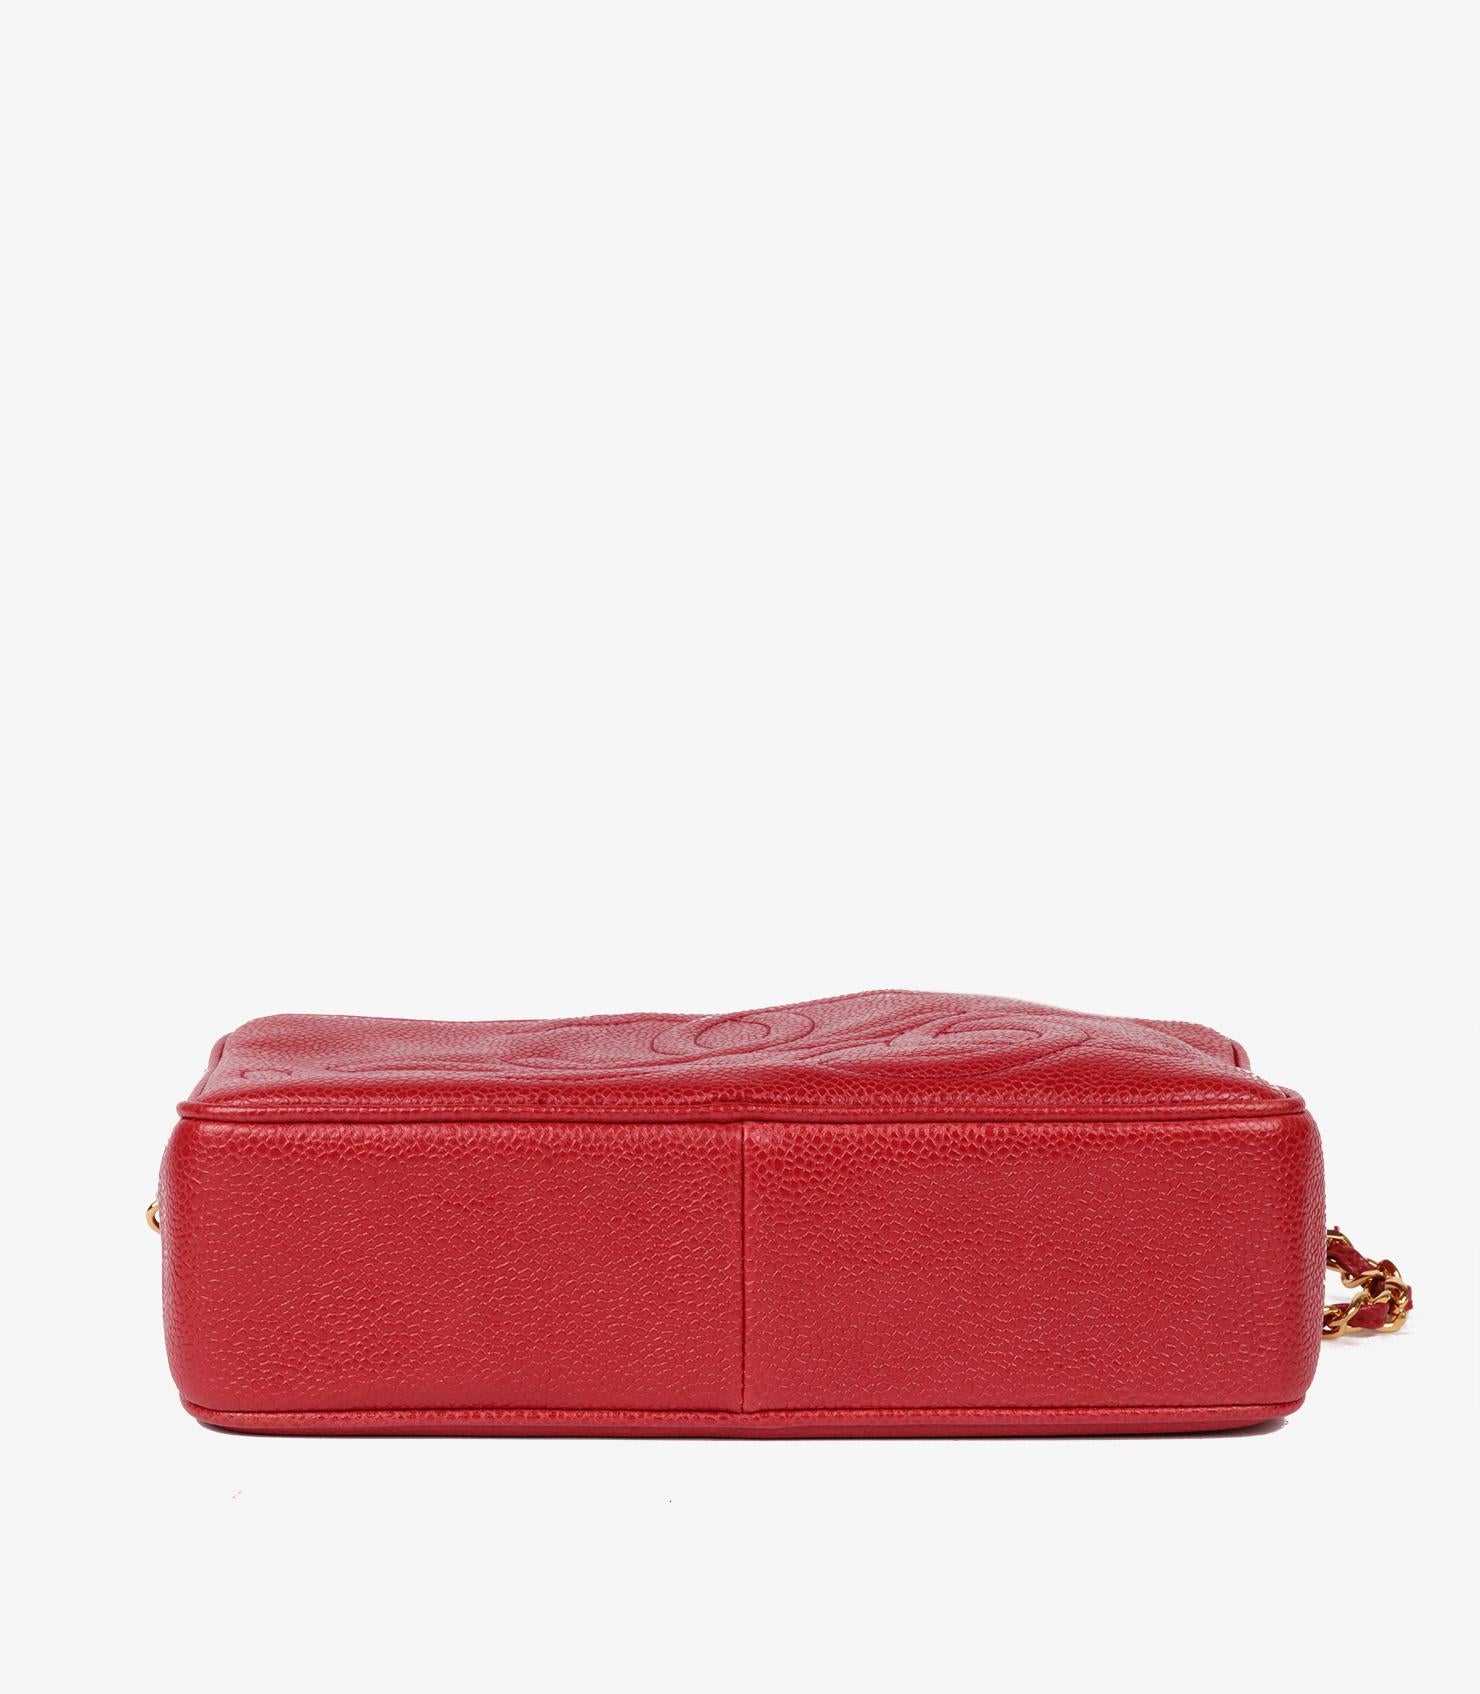 Chanel Red Caviar Leather Vintage Timeless Camera Bag For Sale 3